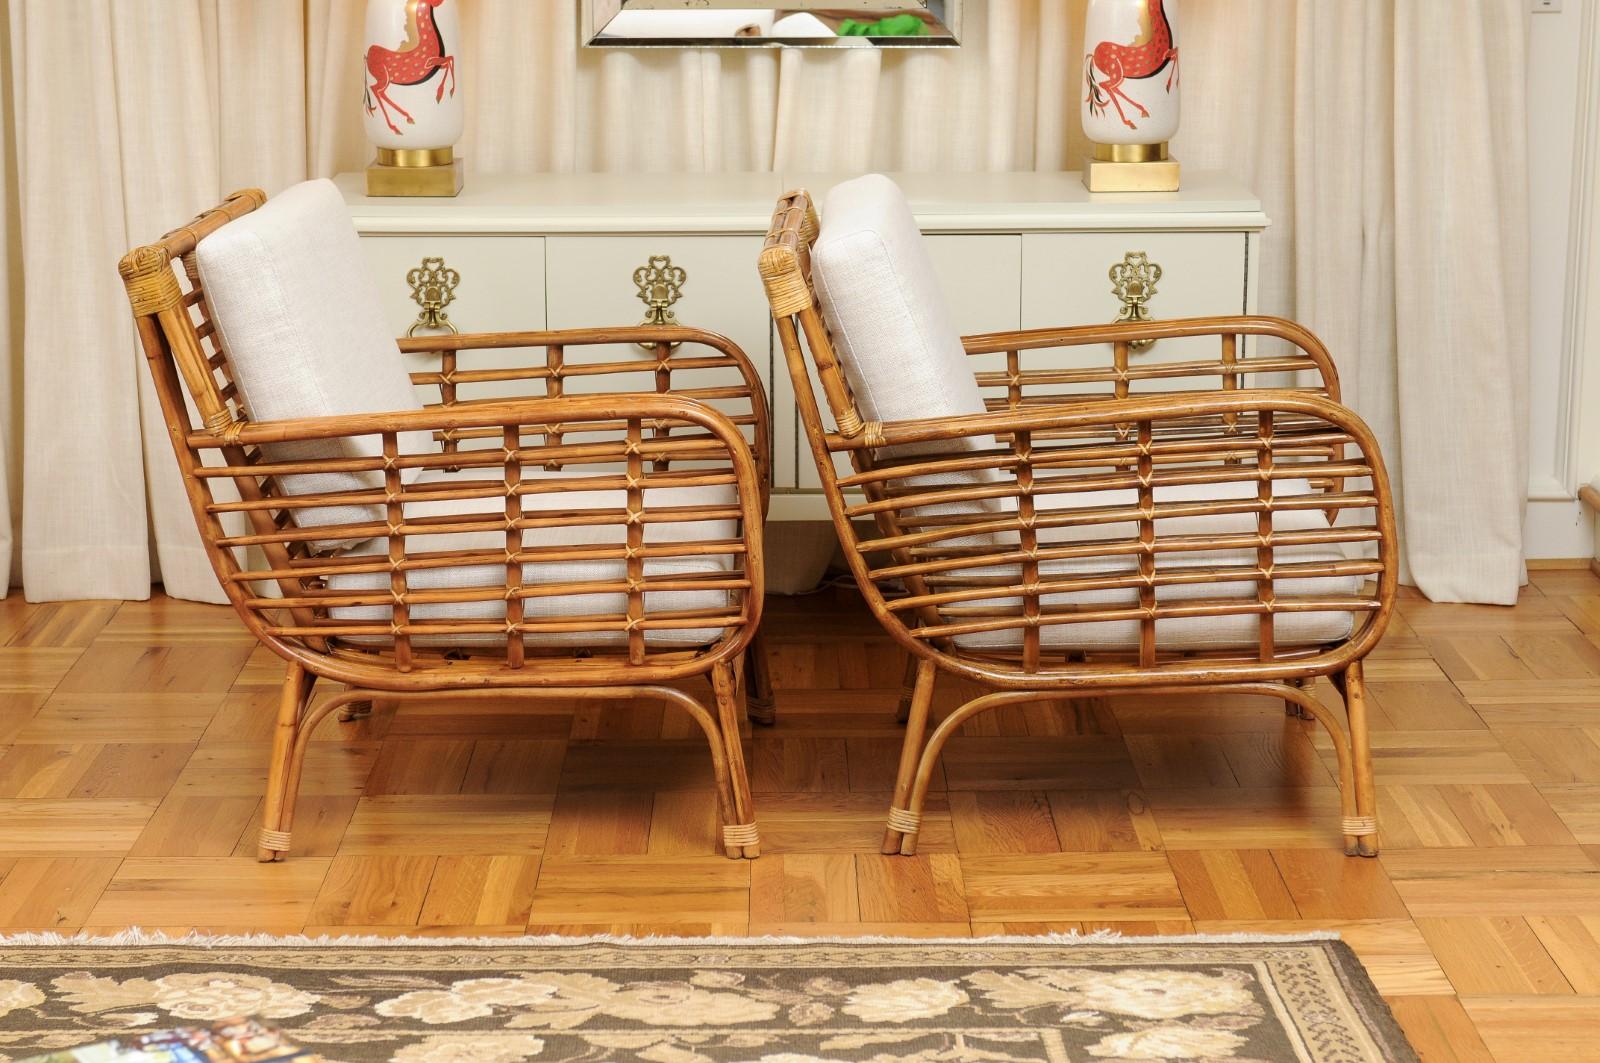 Set of 4 Fabulous Restored Birdcage Style Rattan and Cane Loungers, circa 1955 For Sale 3